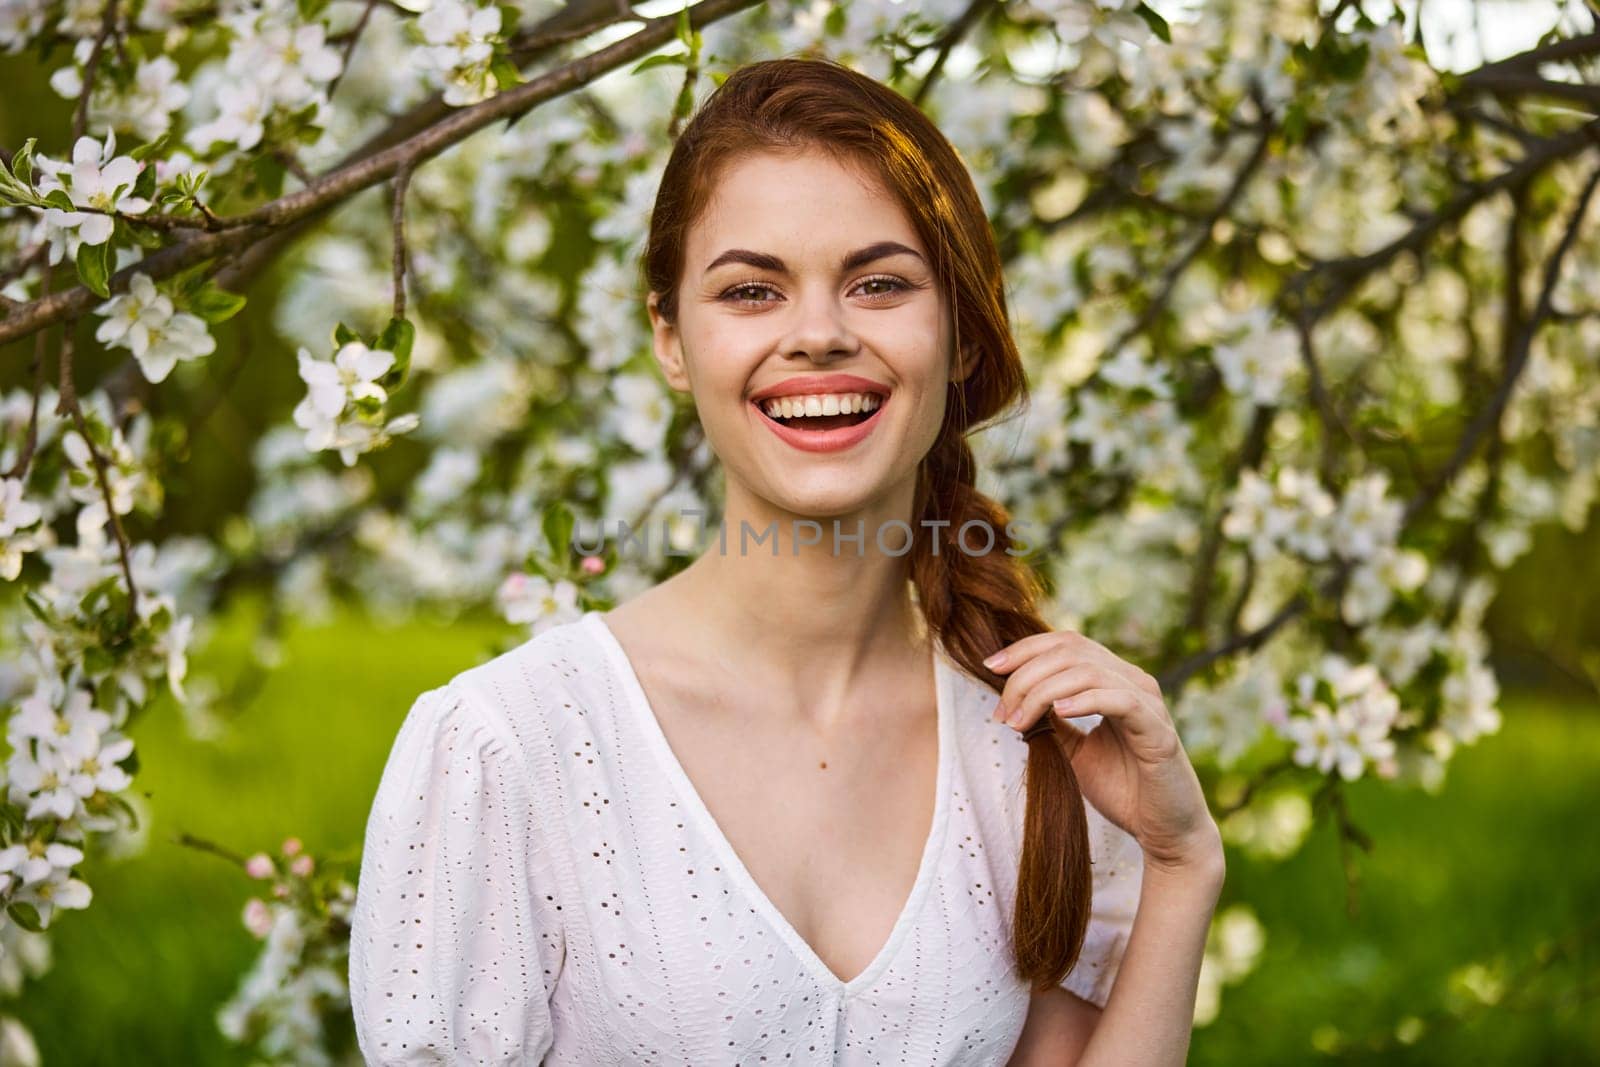 portrait of a joyful woman in a light dress against the background of a flowering tree, holding herself by her braid. High quality photo